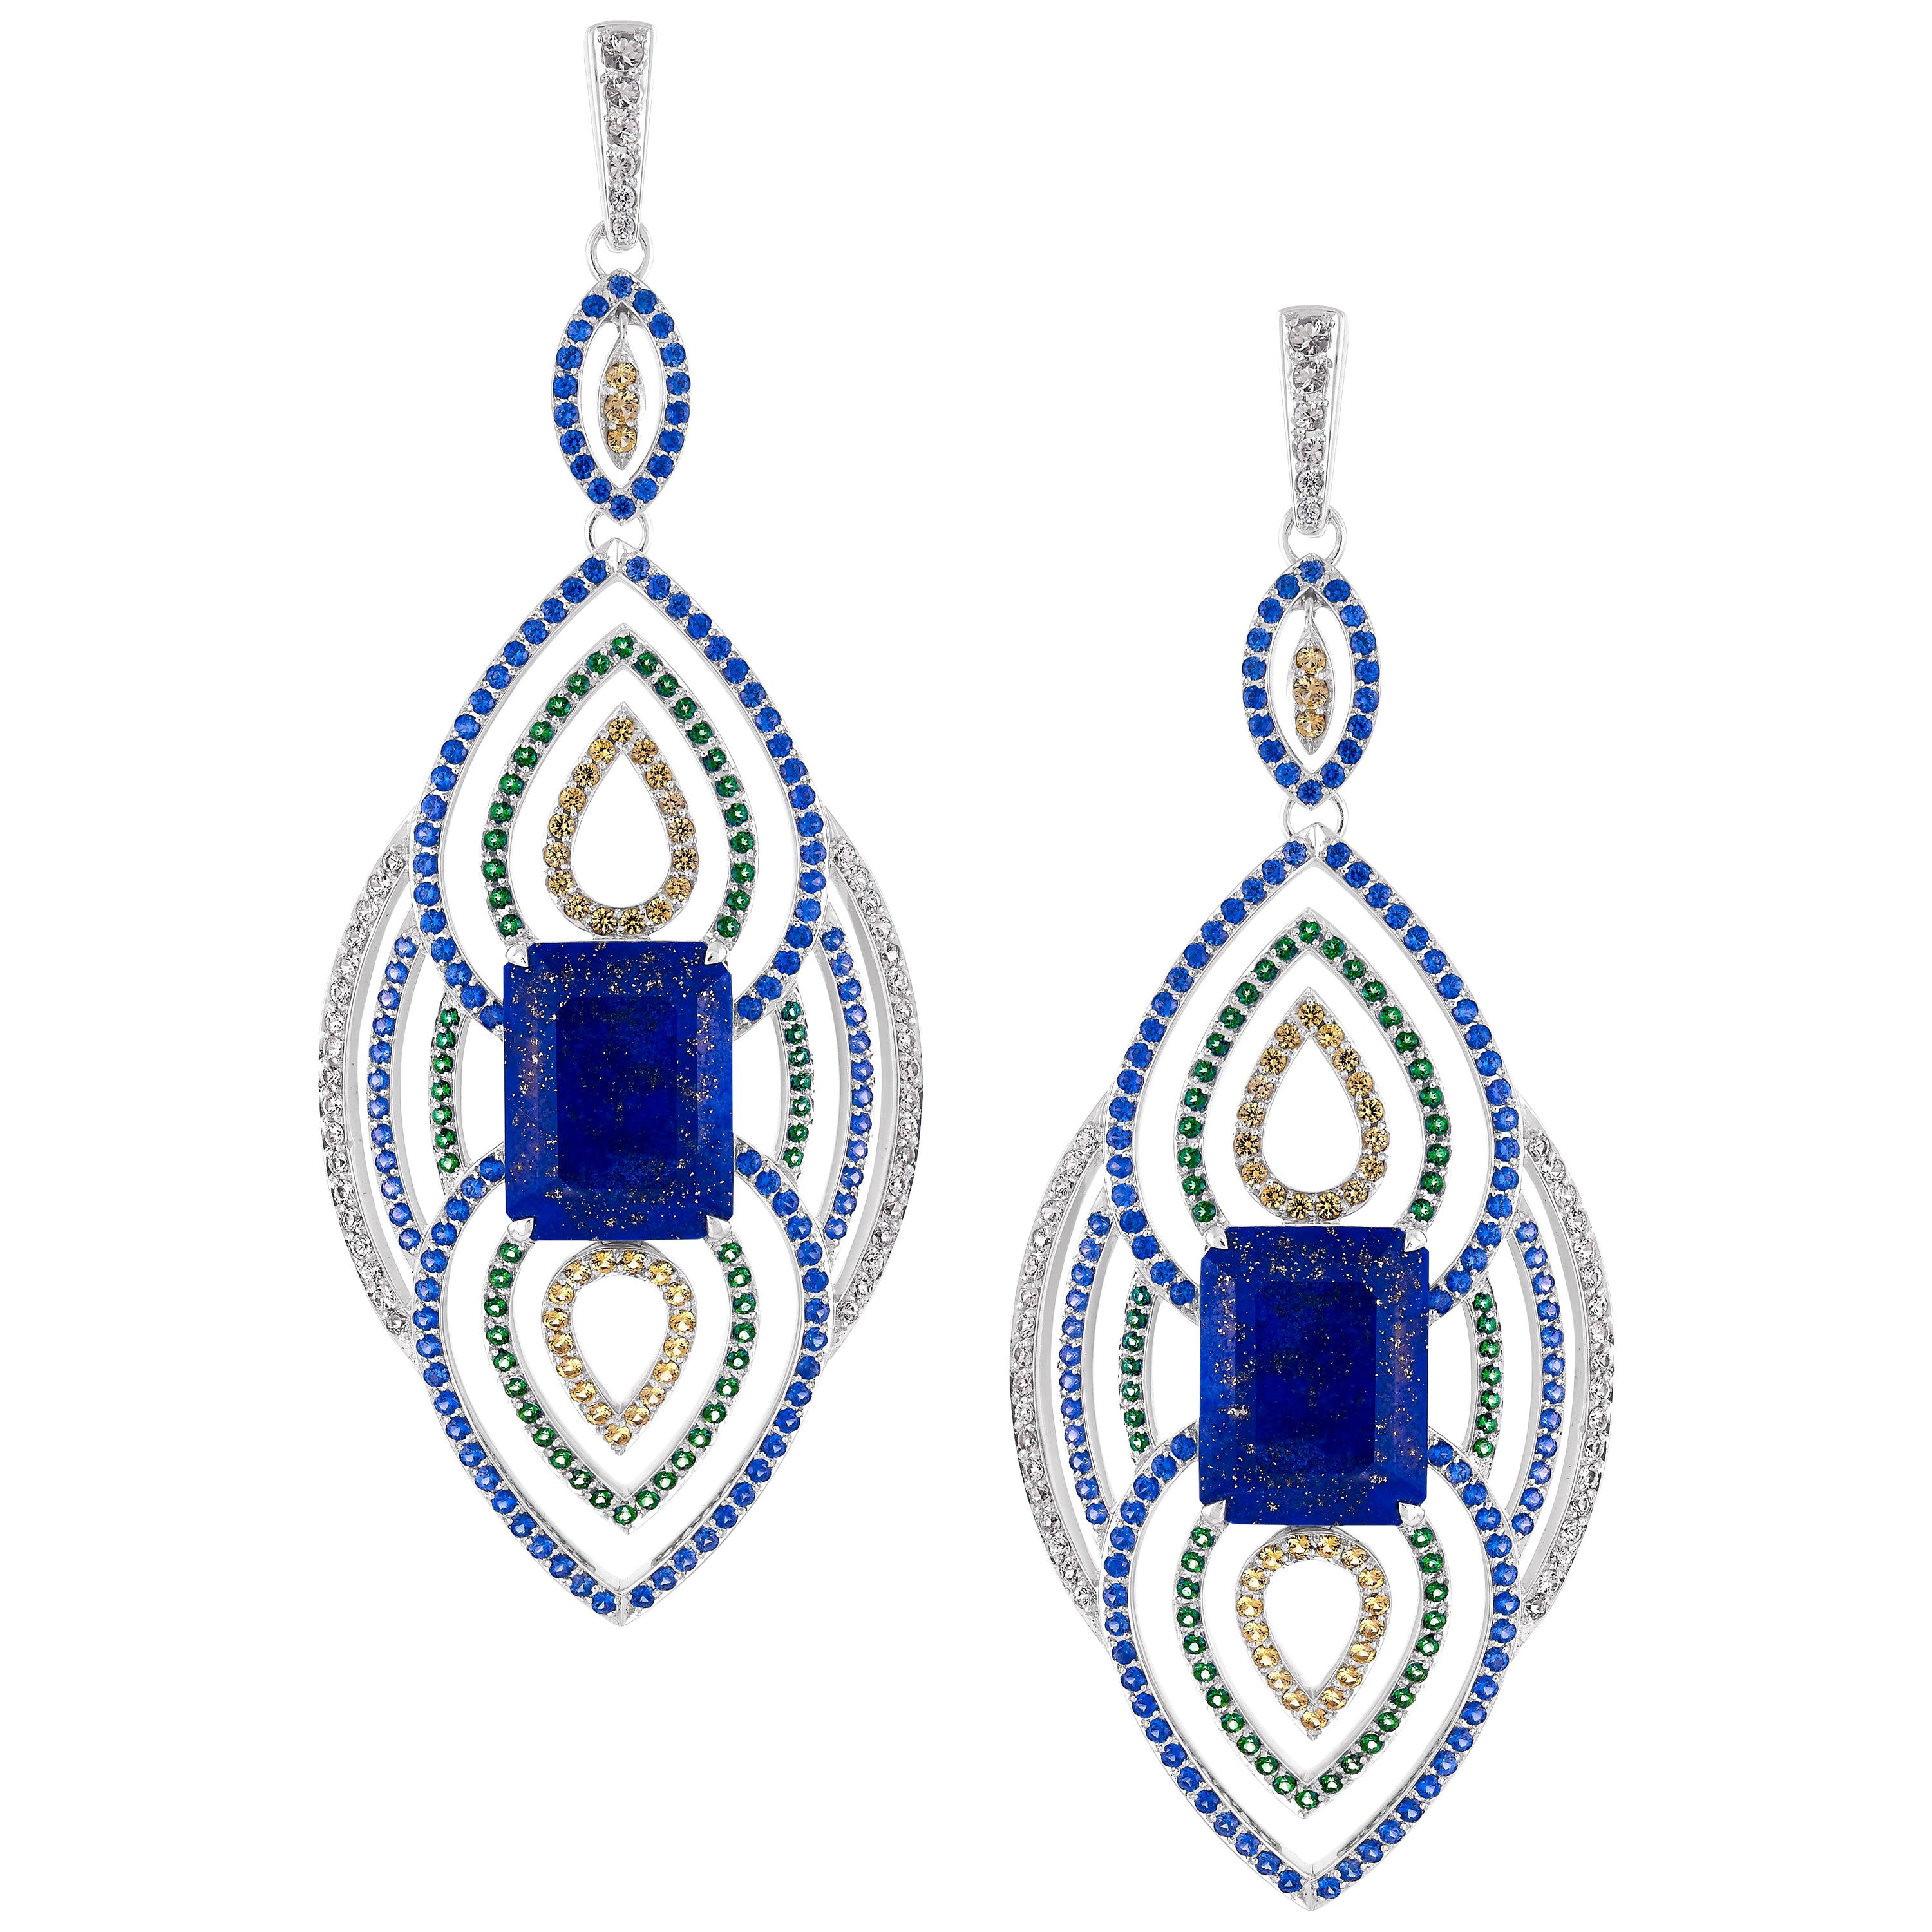 19.56 Carat Lapis with Blue and Green Sapphire Diamond Earrings in 18 Karat Gold